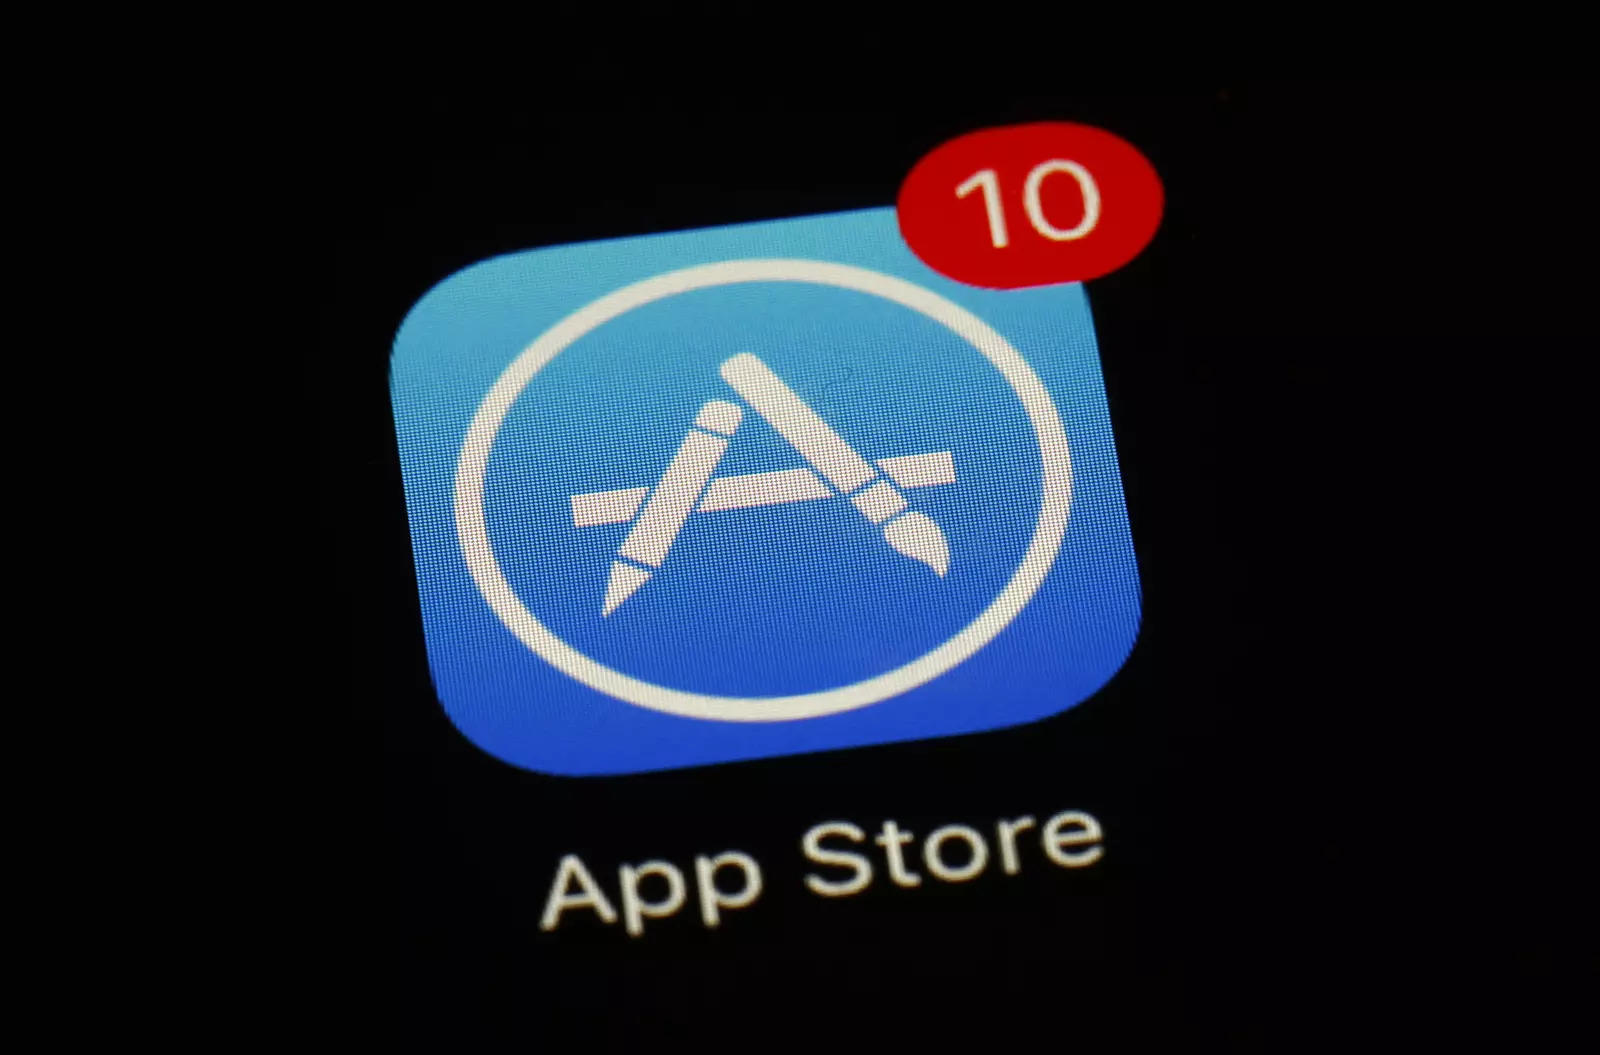 Apple Store app updated with new features